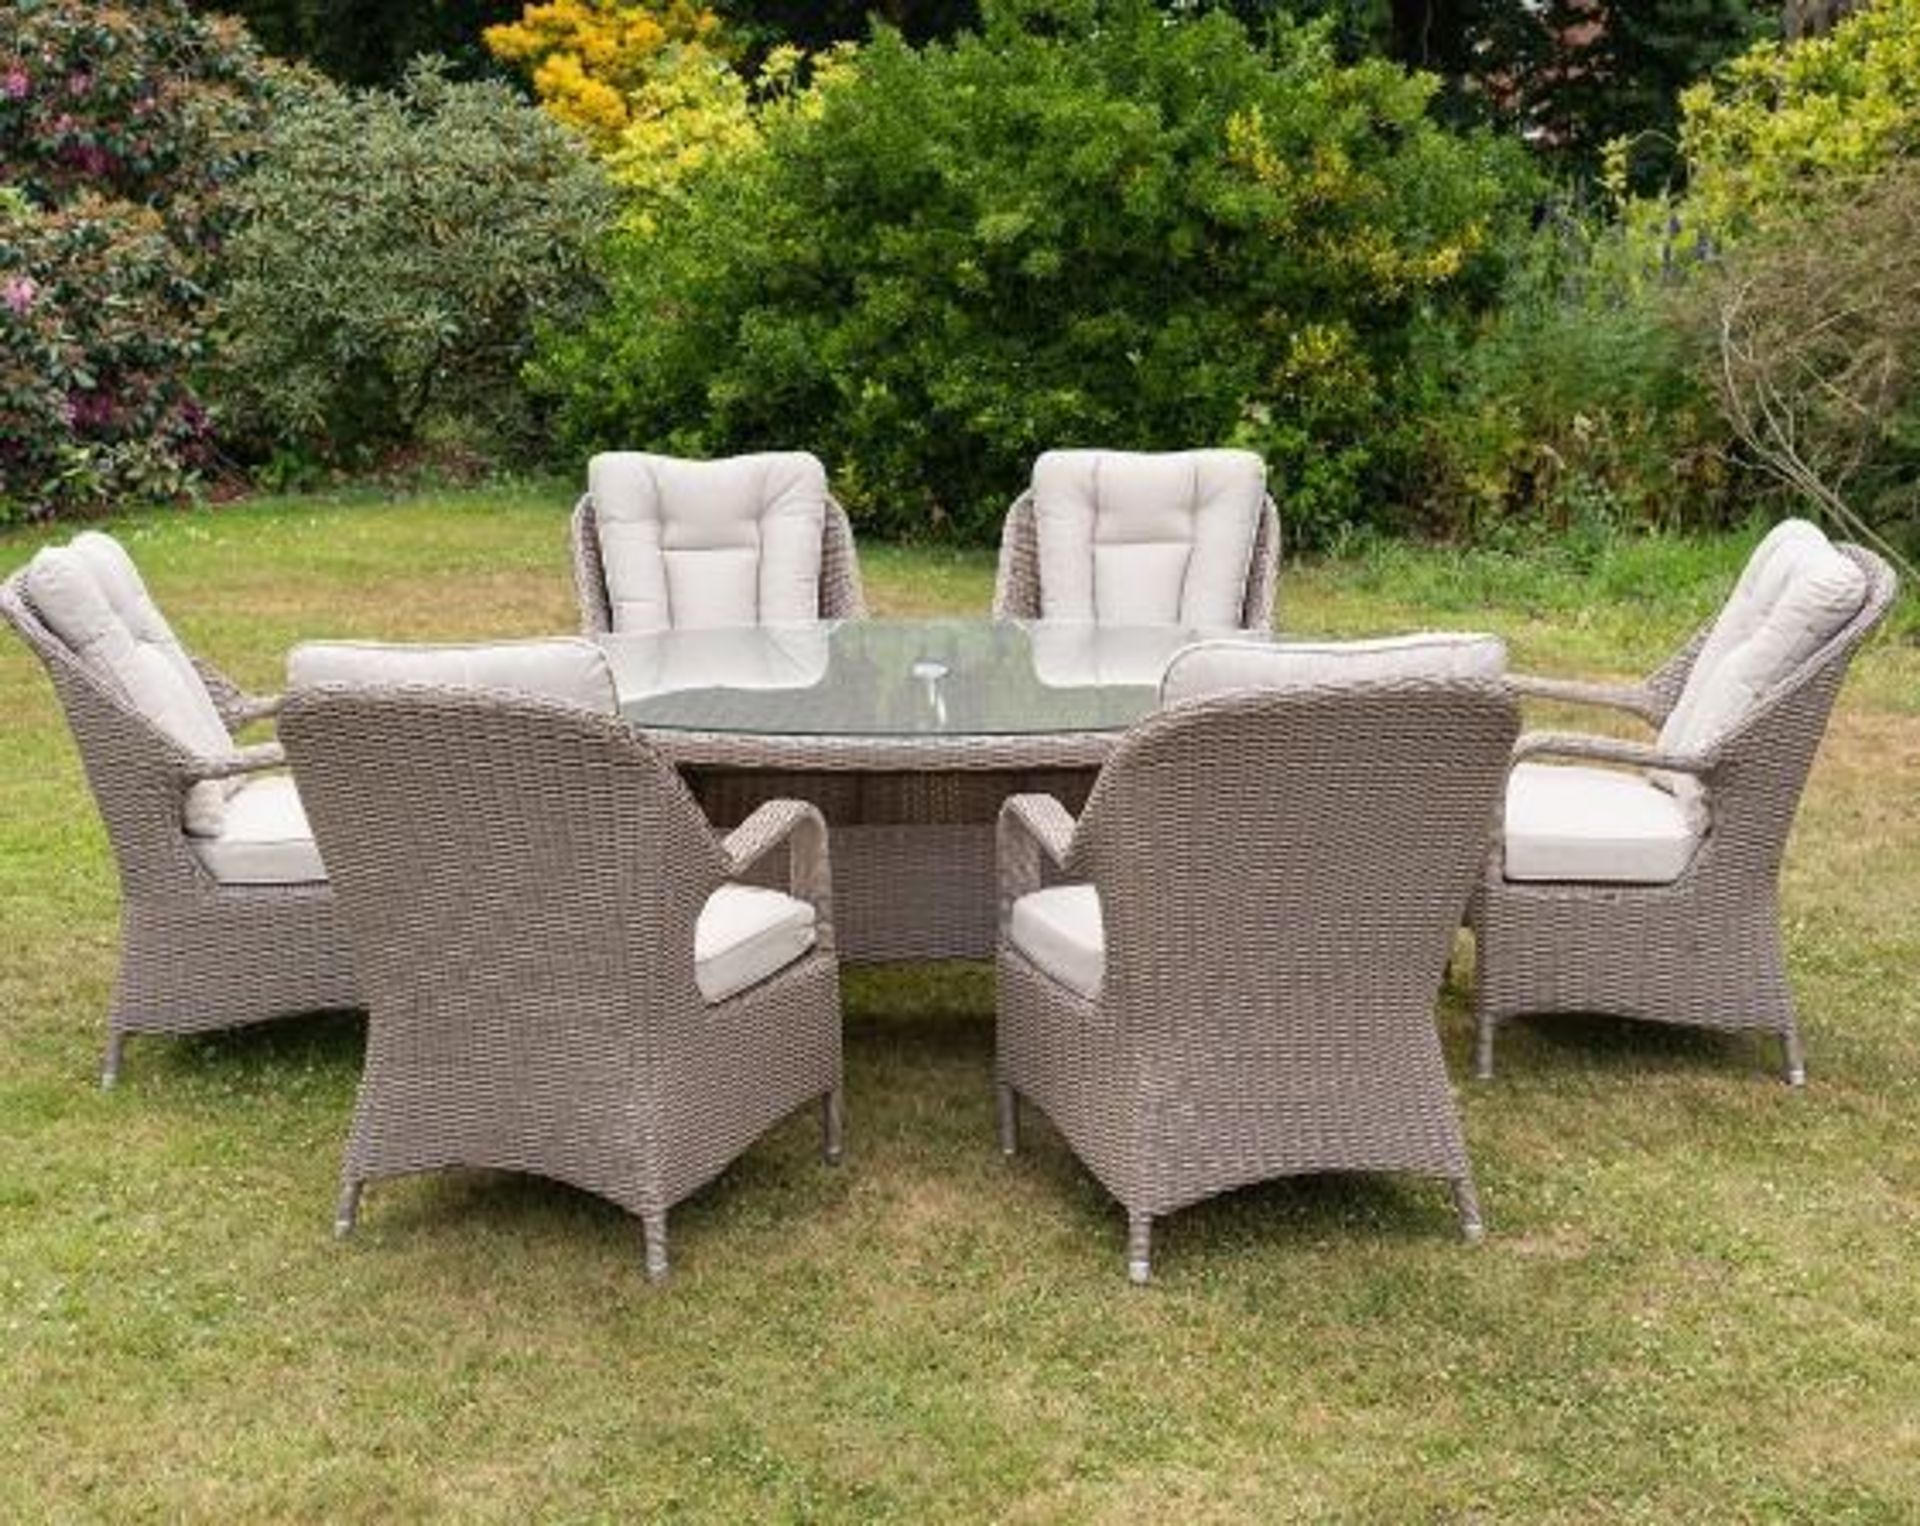 Brand New Moda Furniture 6 Seater Oval Outdoor Dining Set in Grey With Grey Cushions. RRP £2399 *8mm